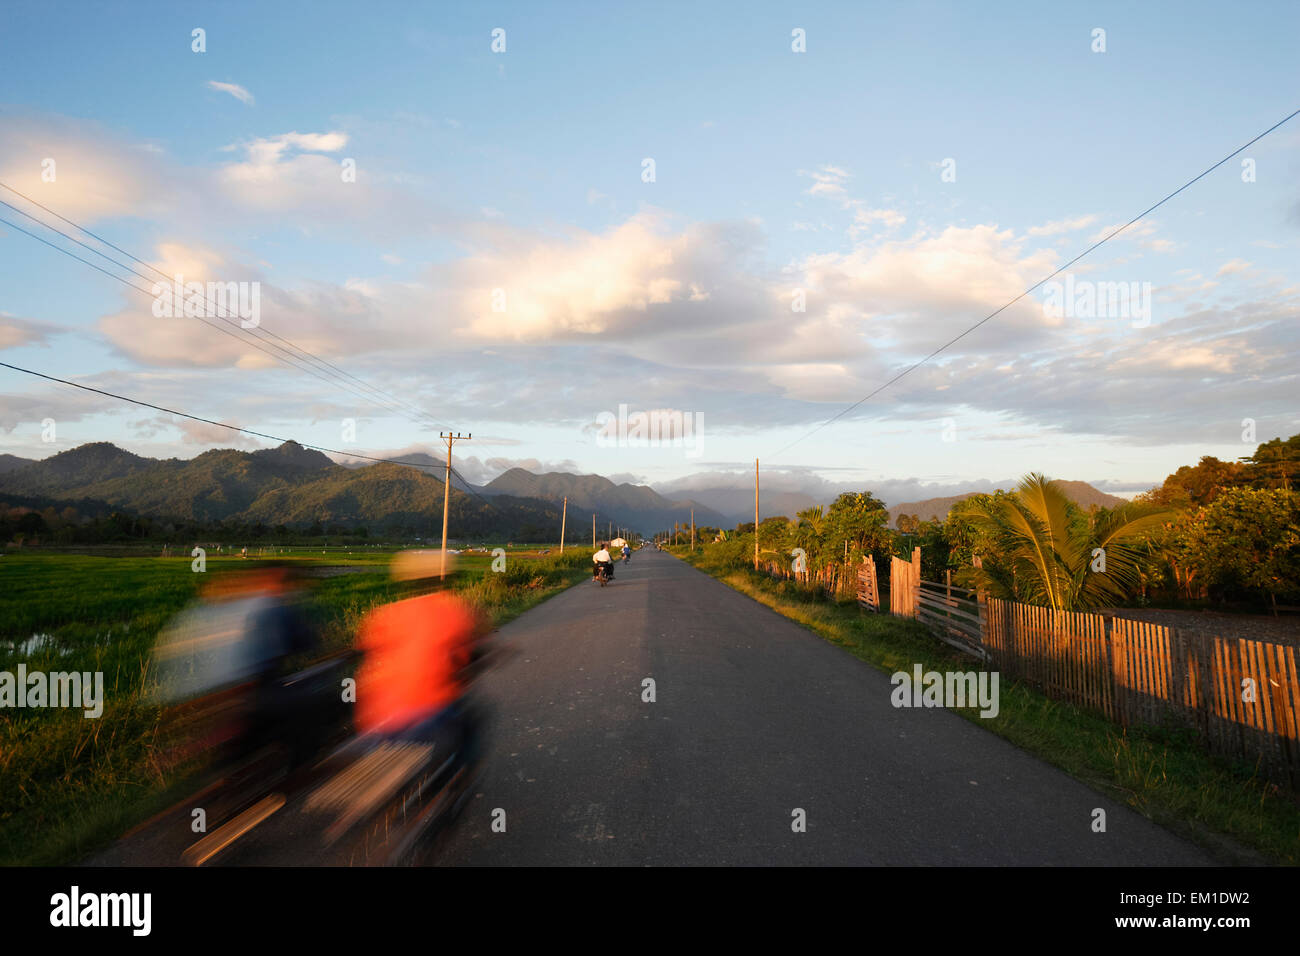 Cyclists speed along the road; Lamno, Aceh Province, Sumatra, Indonesia Stock Photo